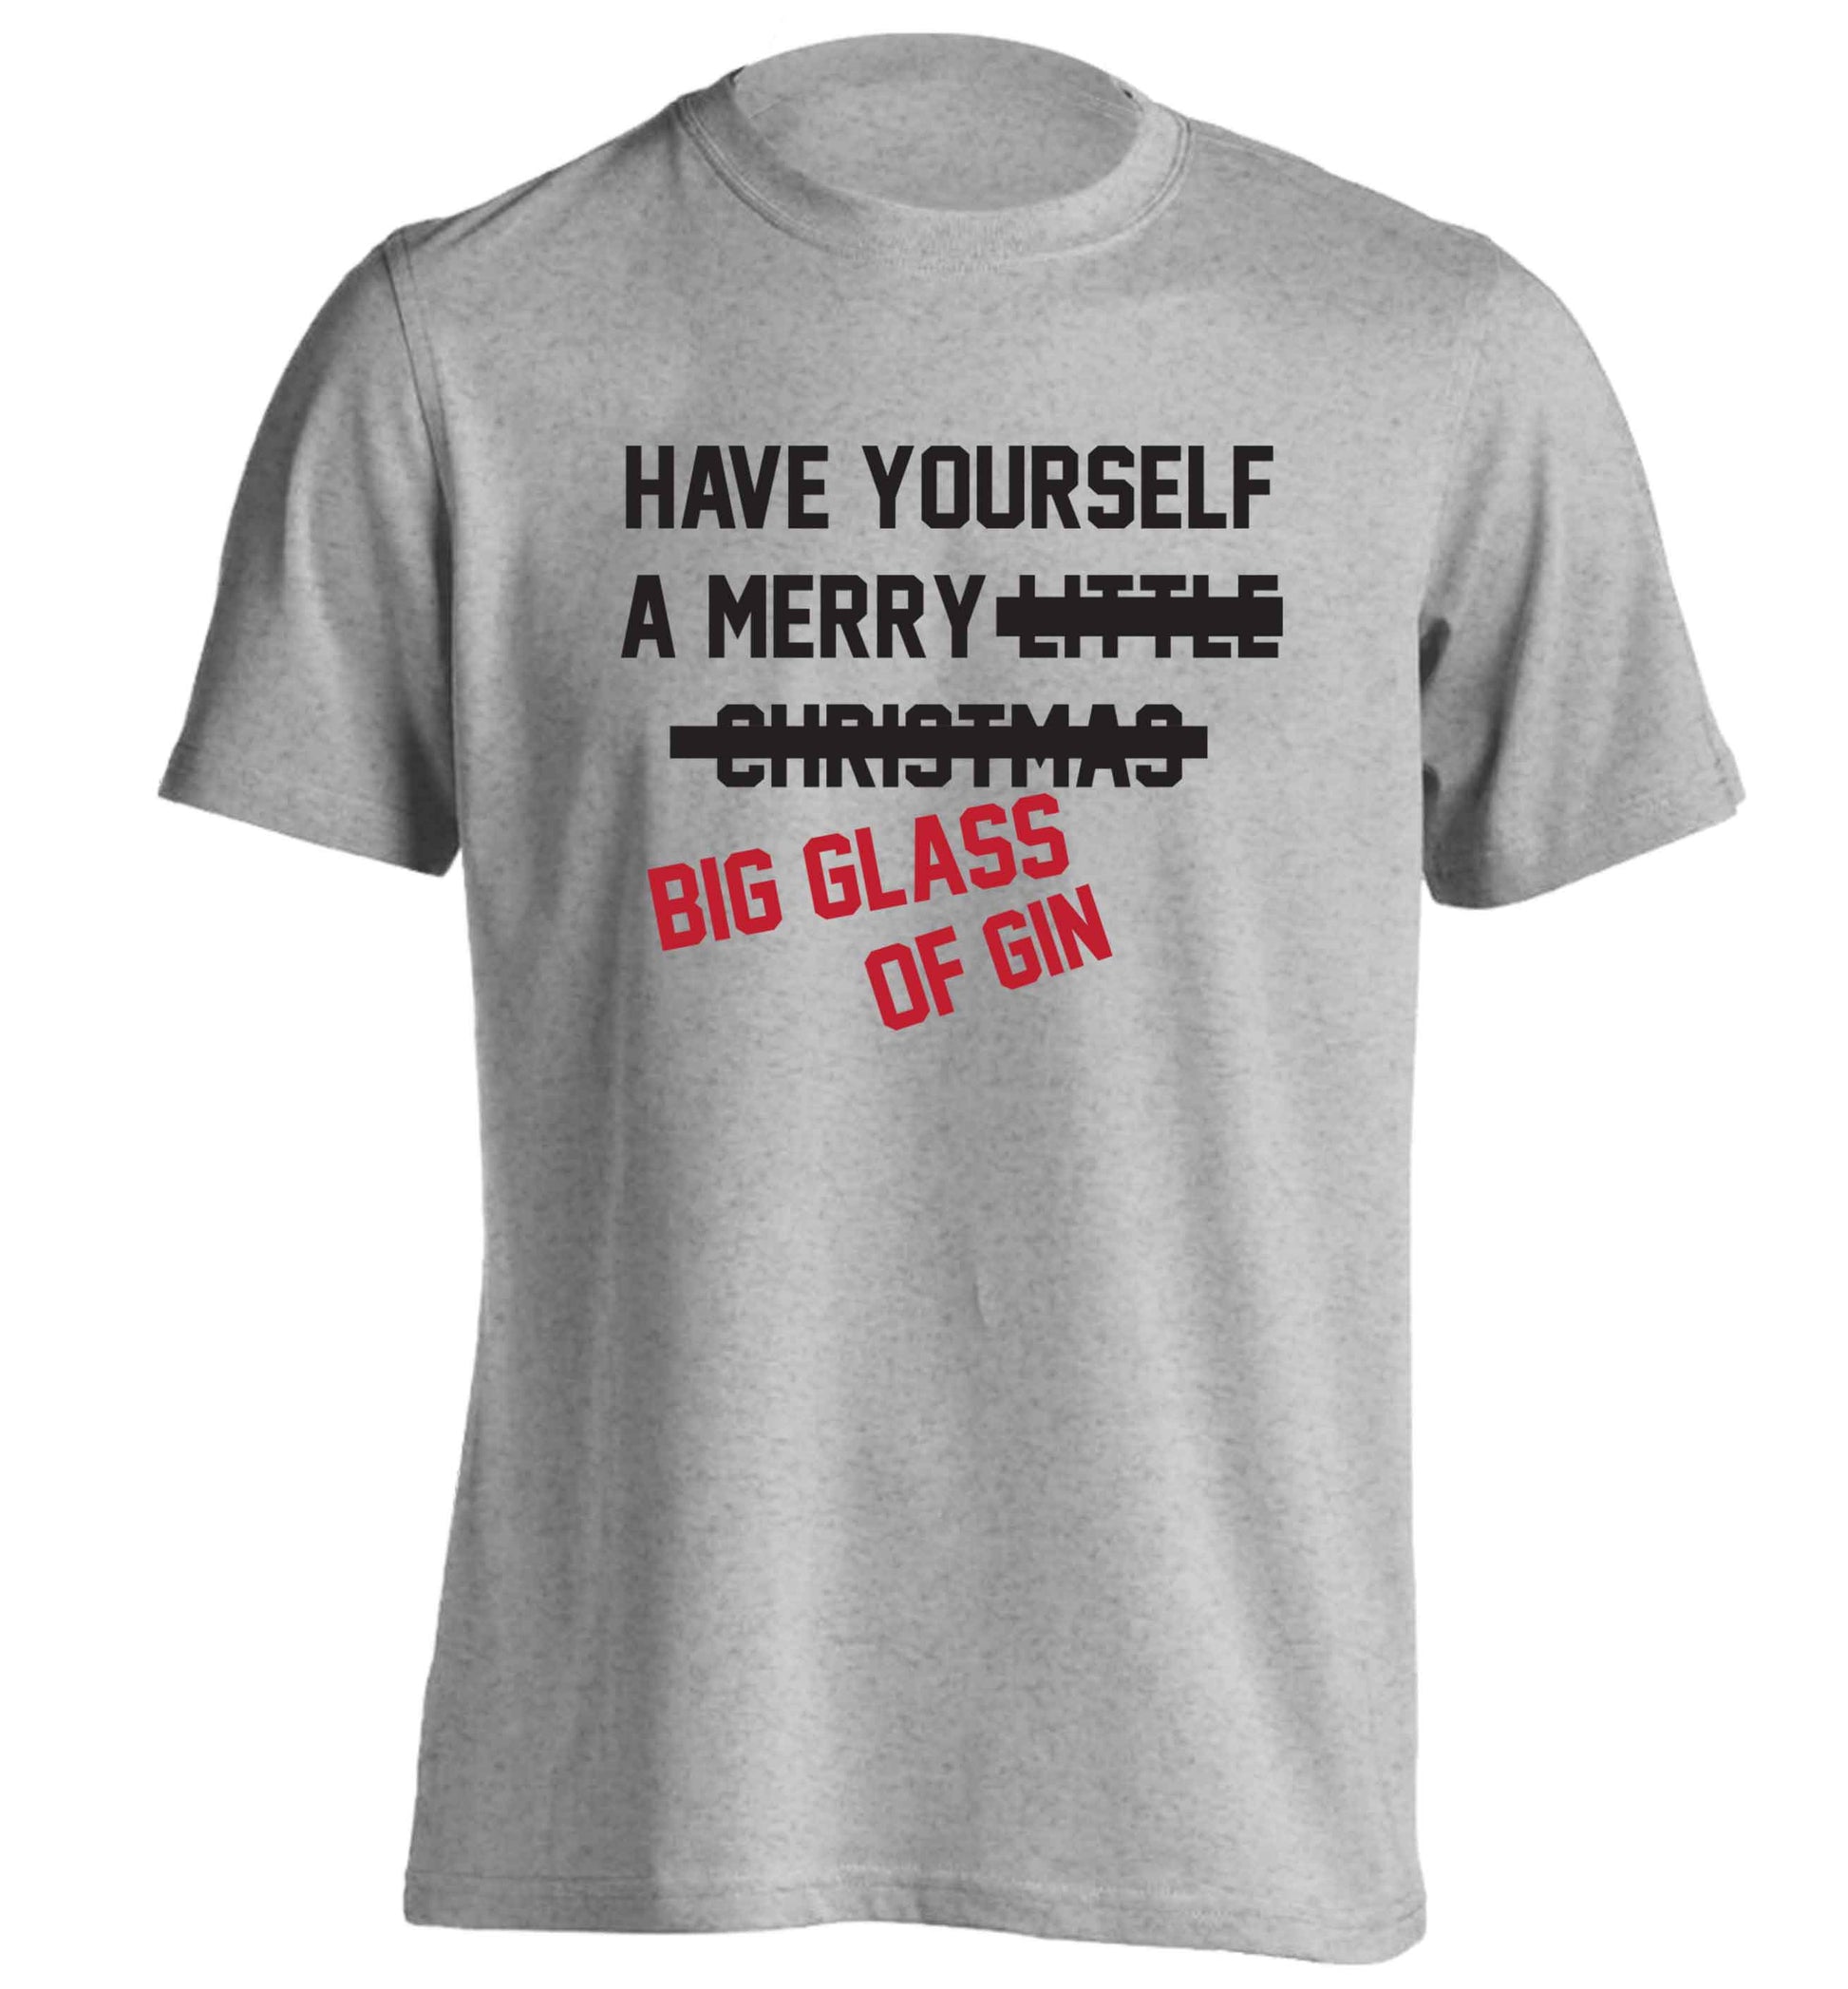 Have yourself a merry big glass of gin adults unisex grey Tshirt 2XL